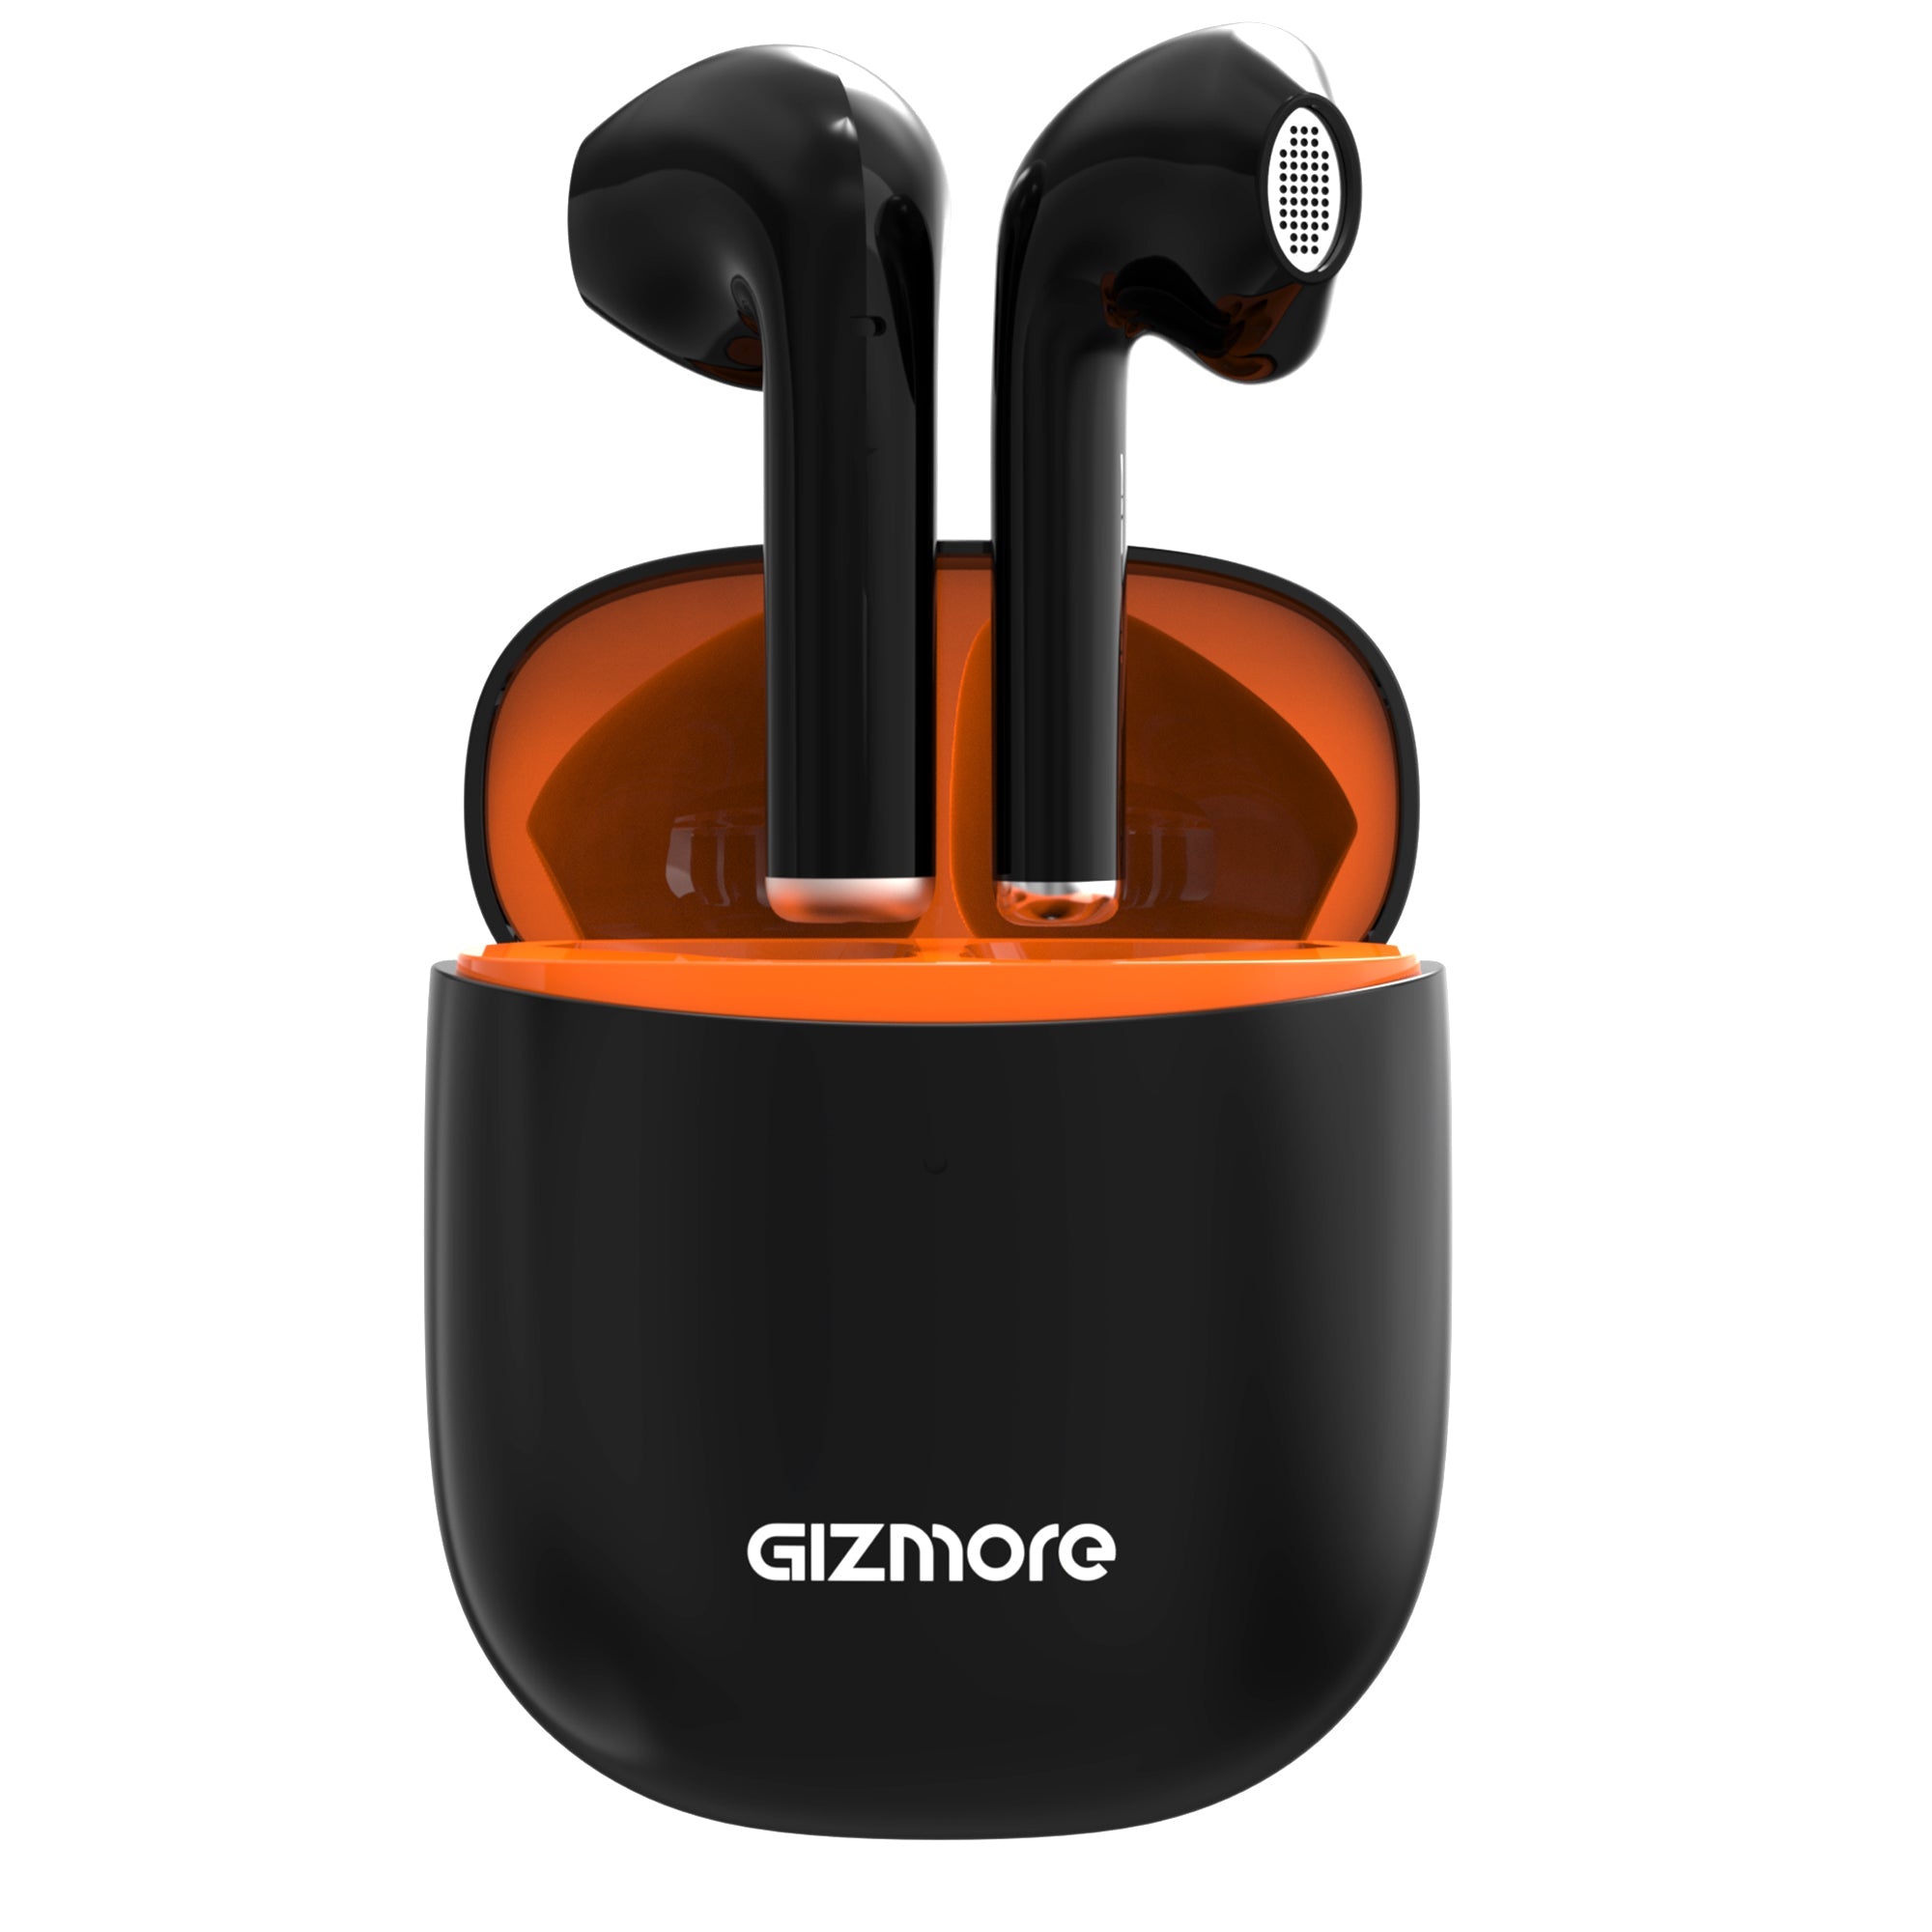 GIZMORE TWS 801 Air Massive Playback Upto 25 Hr, Voice Assistant & Type C Fast Charge Bluetooth Headset